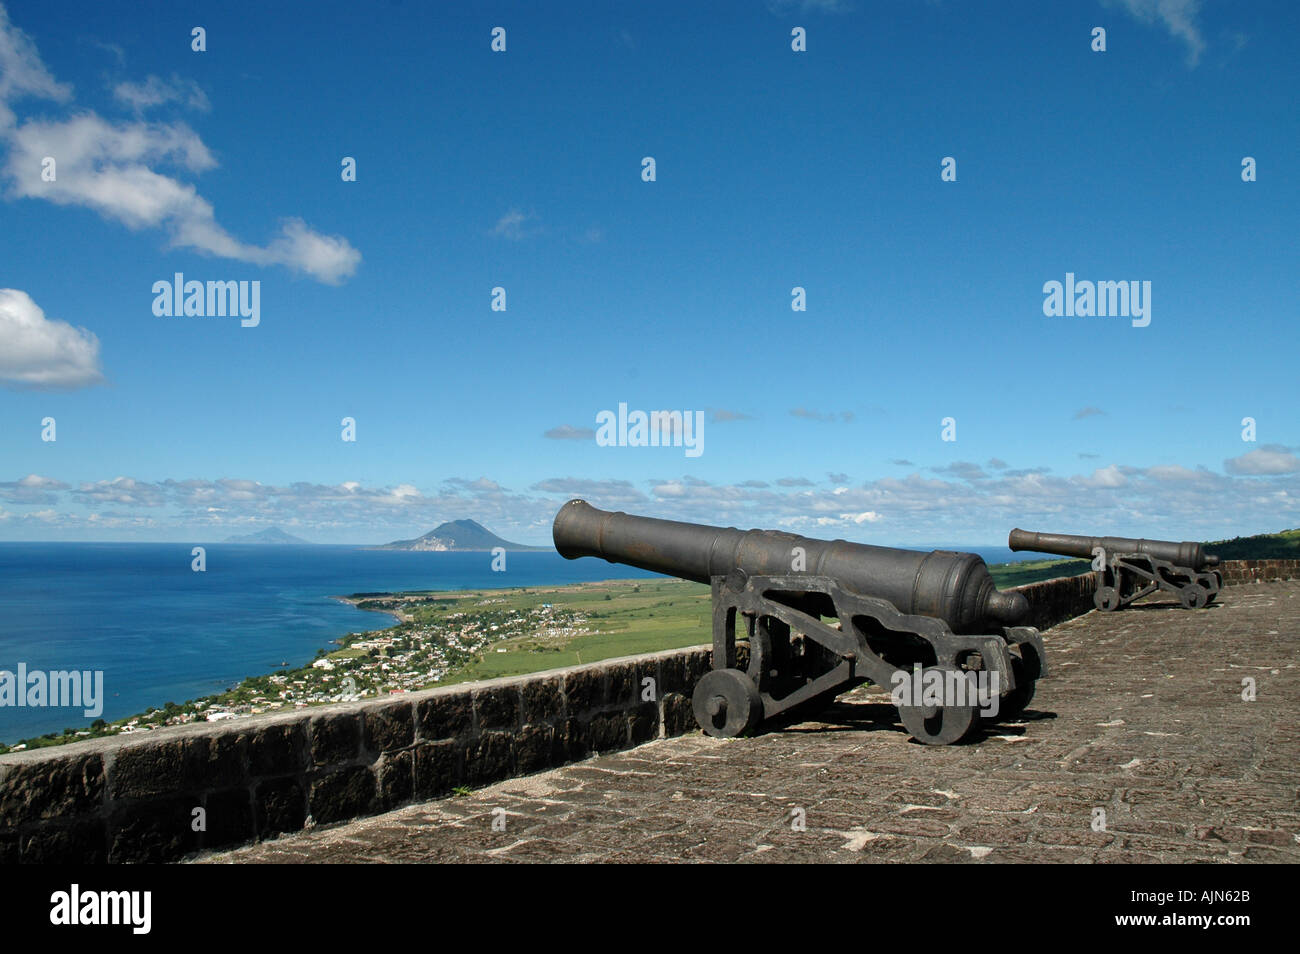 St Kitts Caribbean West Indies Brimstone Hill Fortress Cannon with St Eustatius and Saba in background Stock Photo